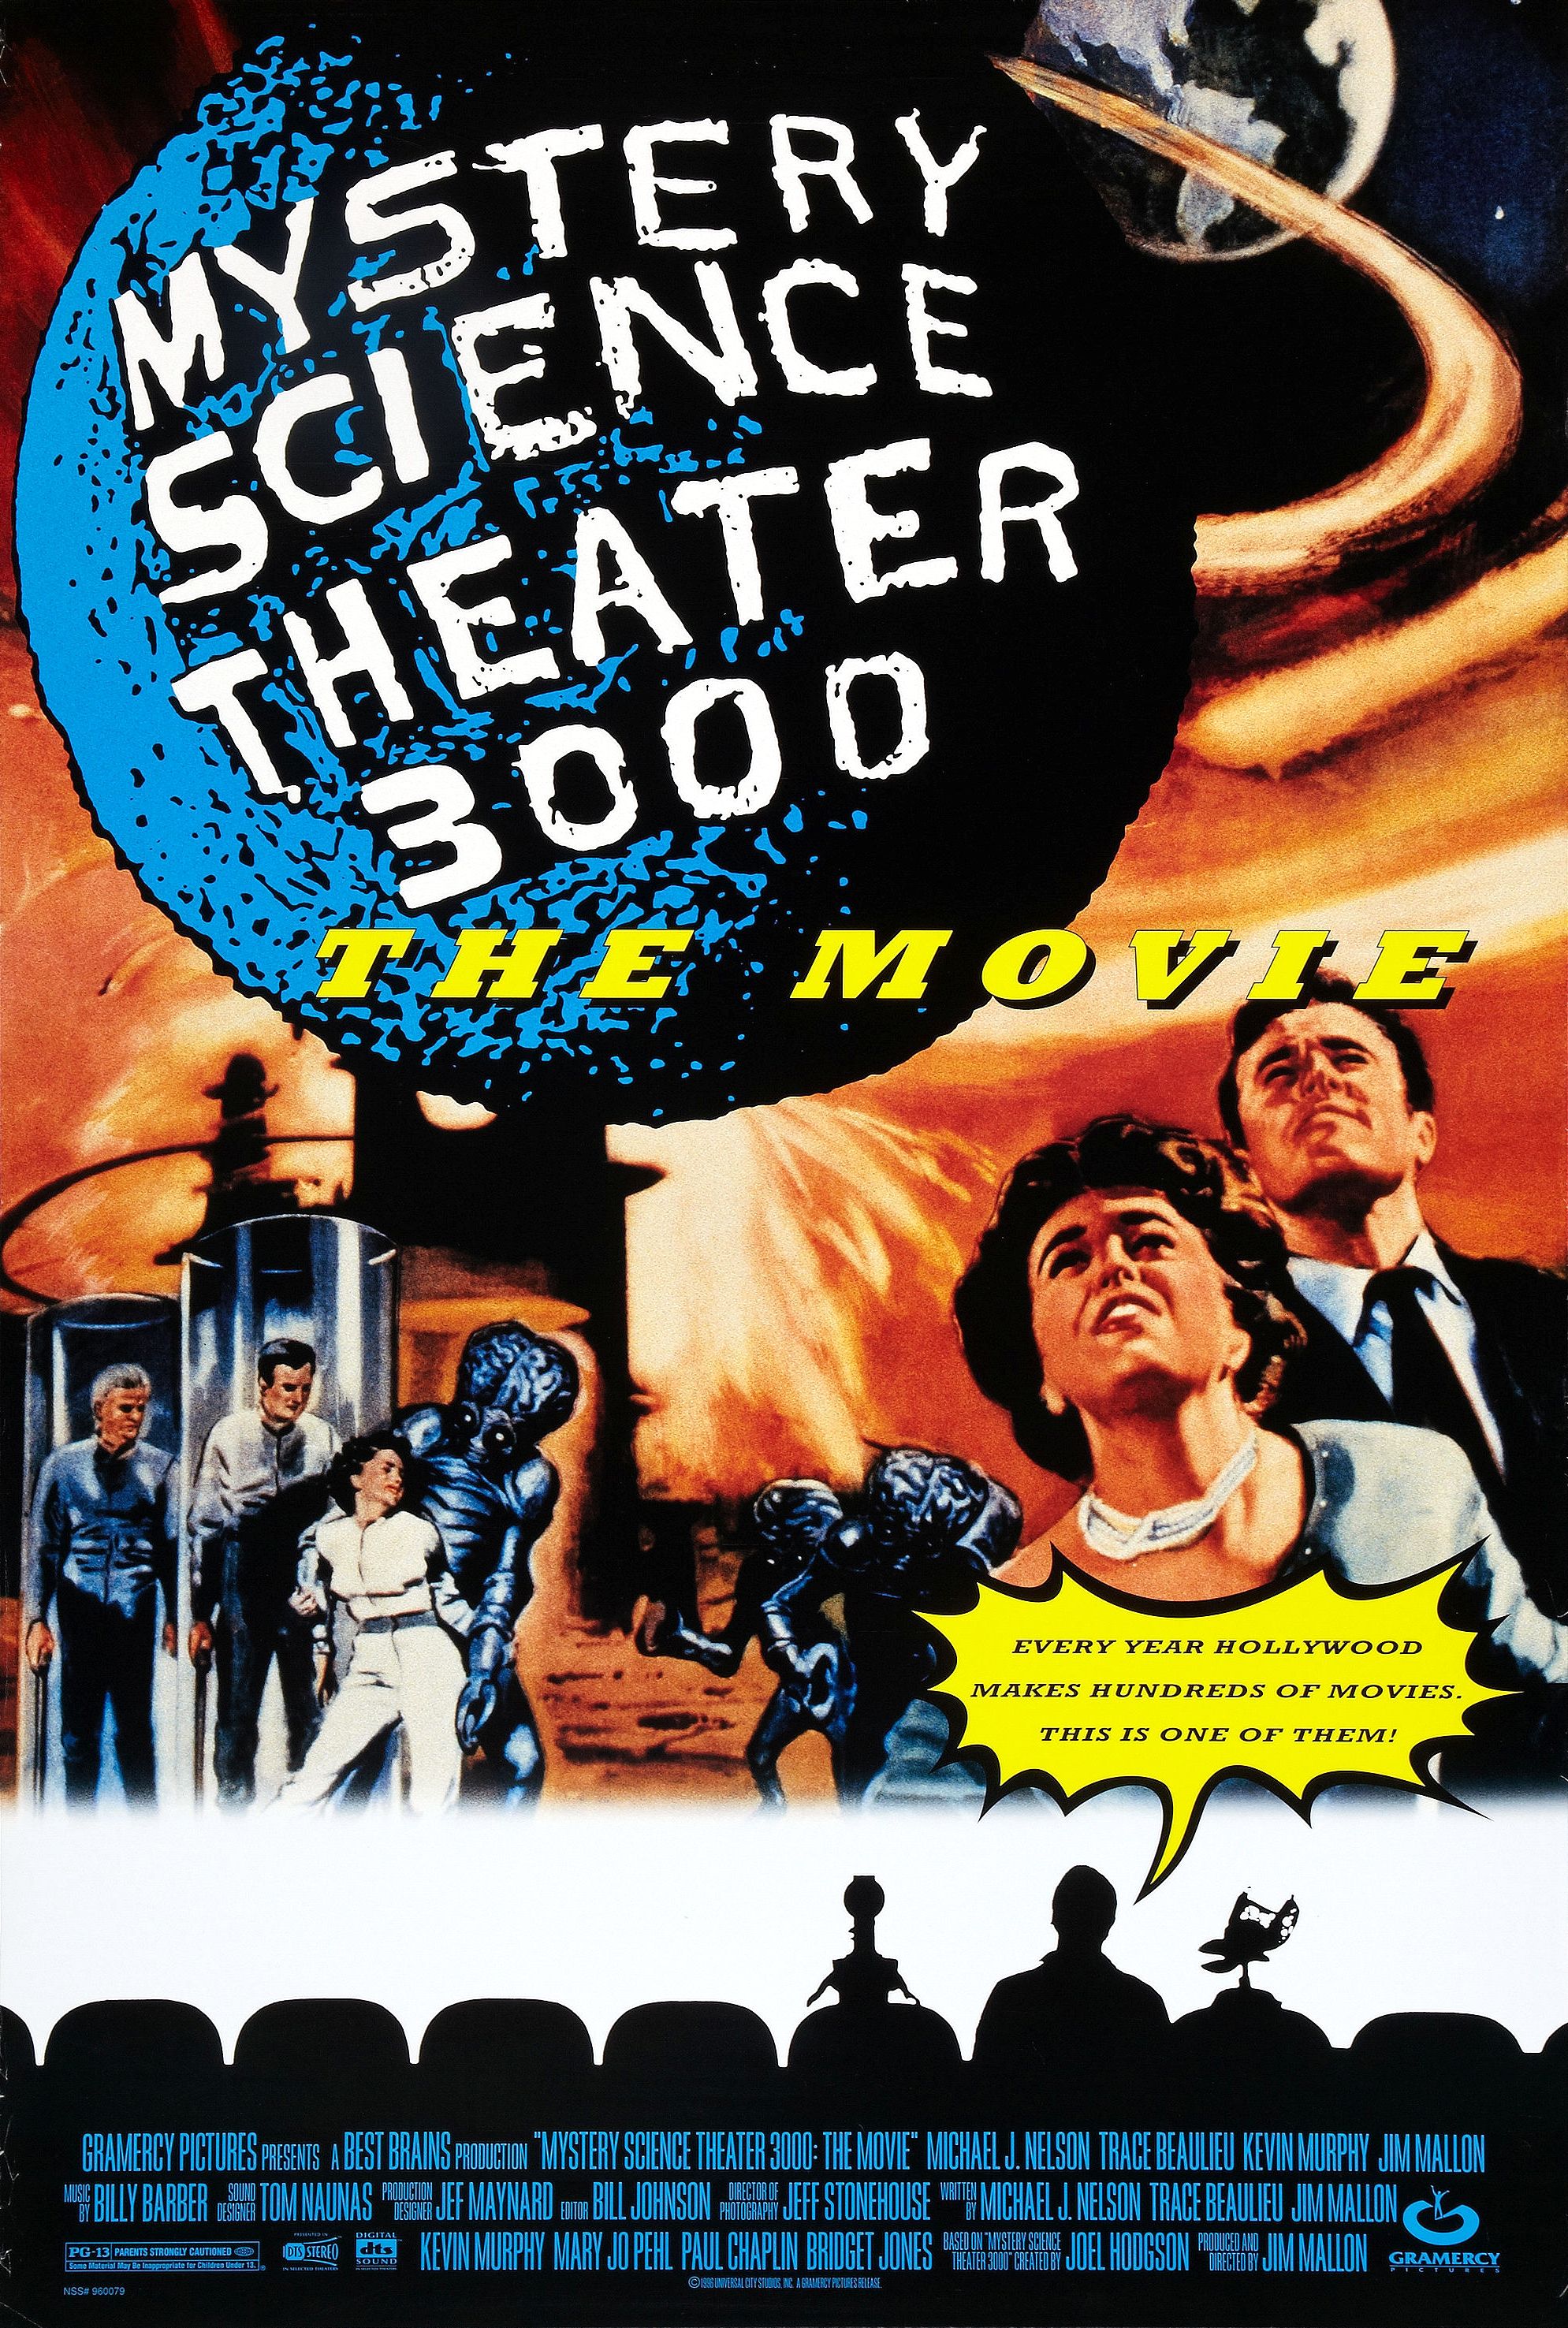 Mystery Science Theater 3000: The Movie (1996) and Bloopers